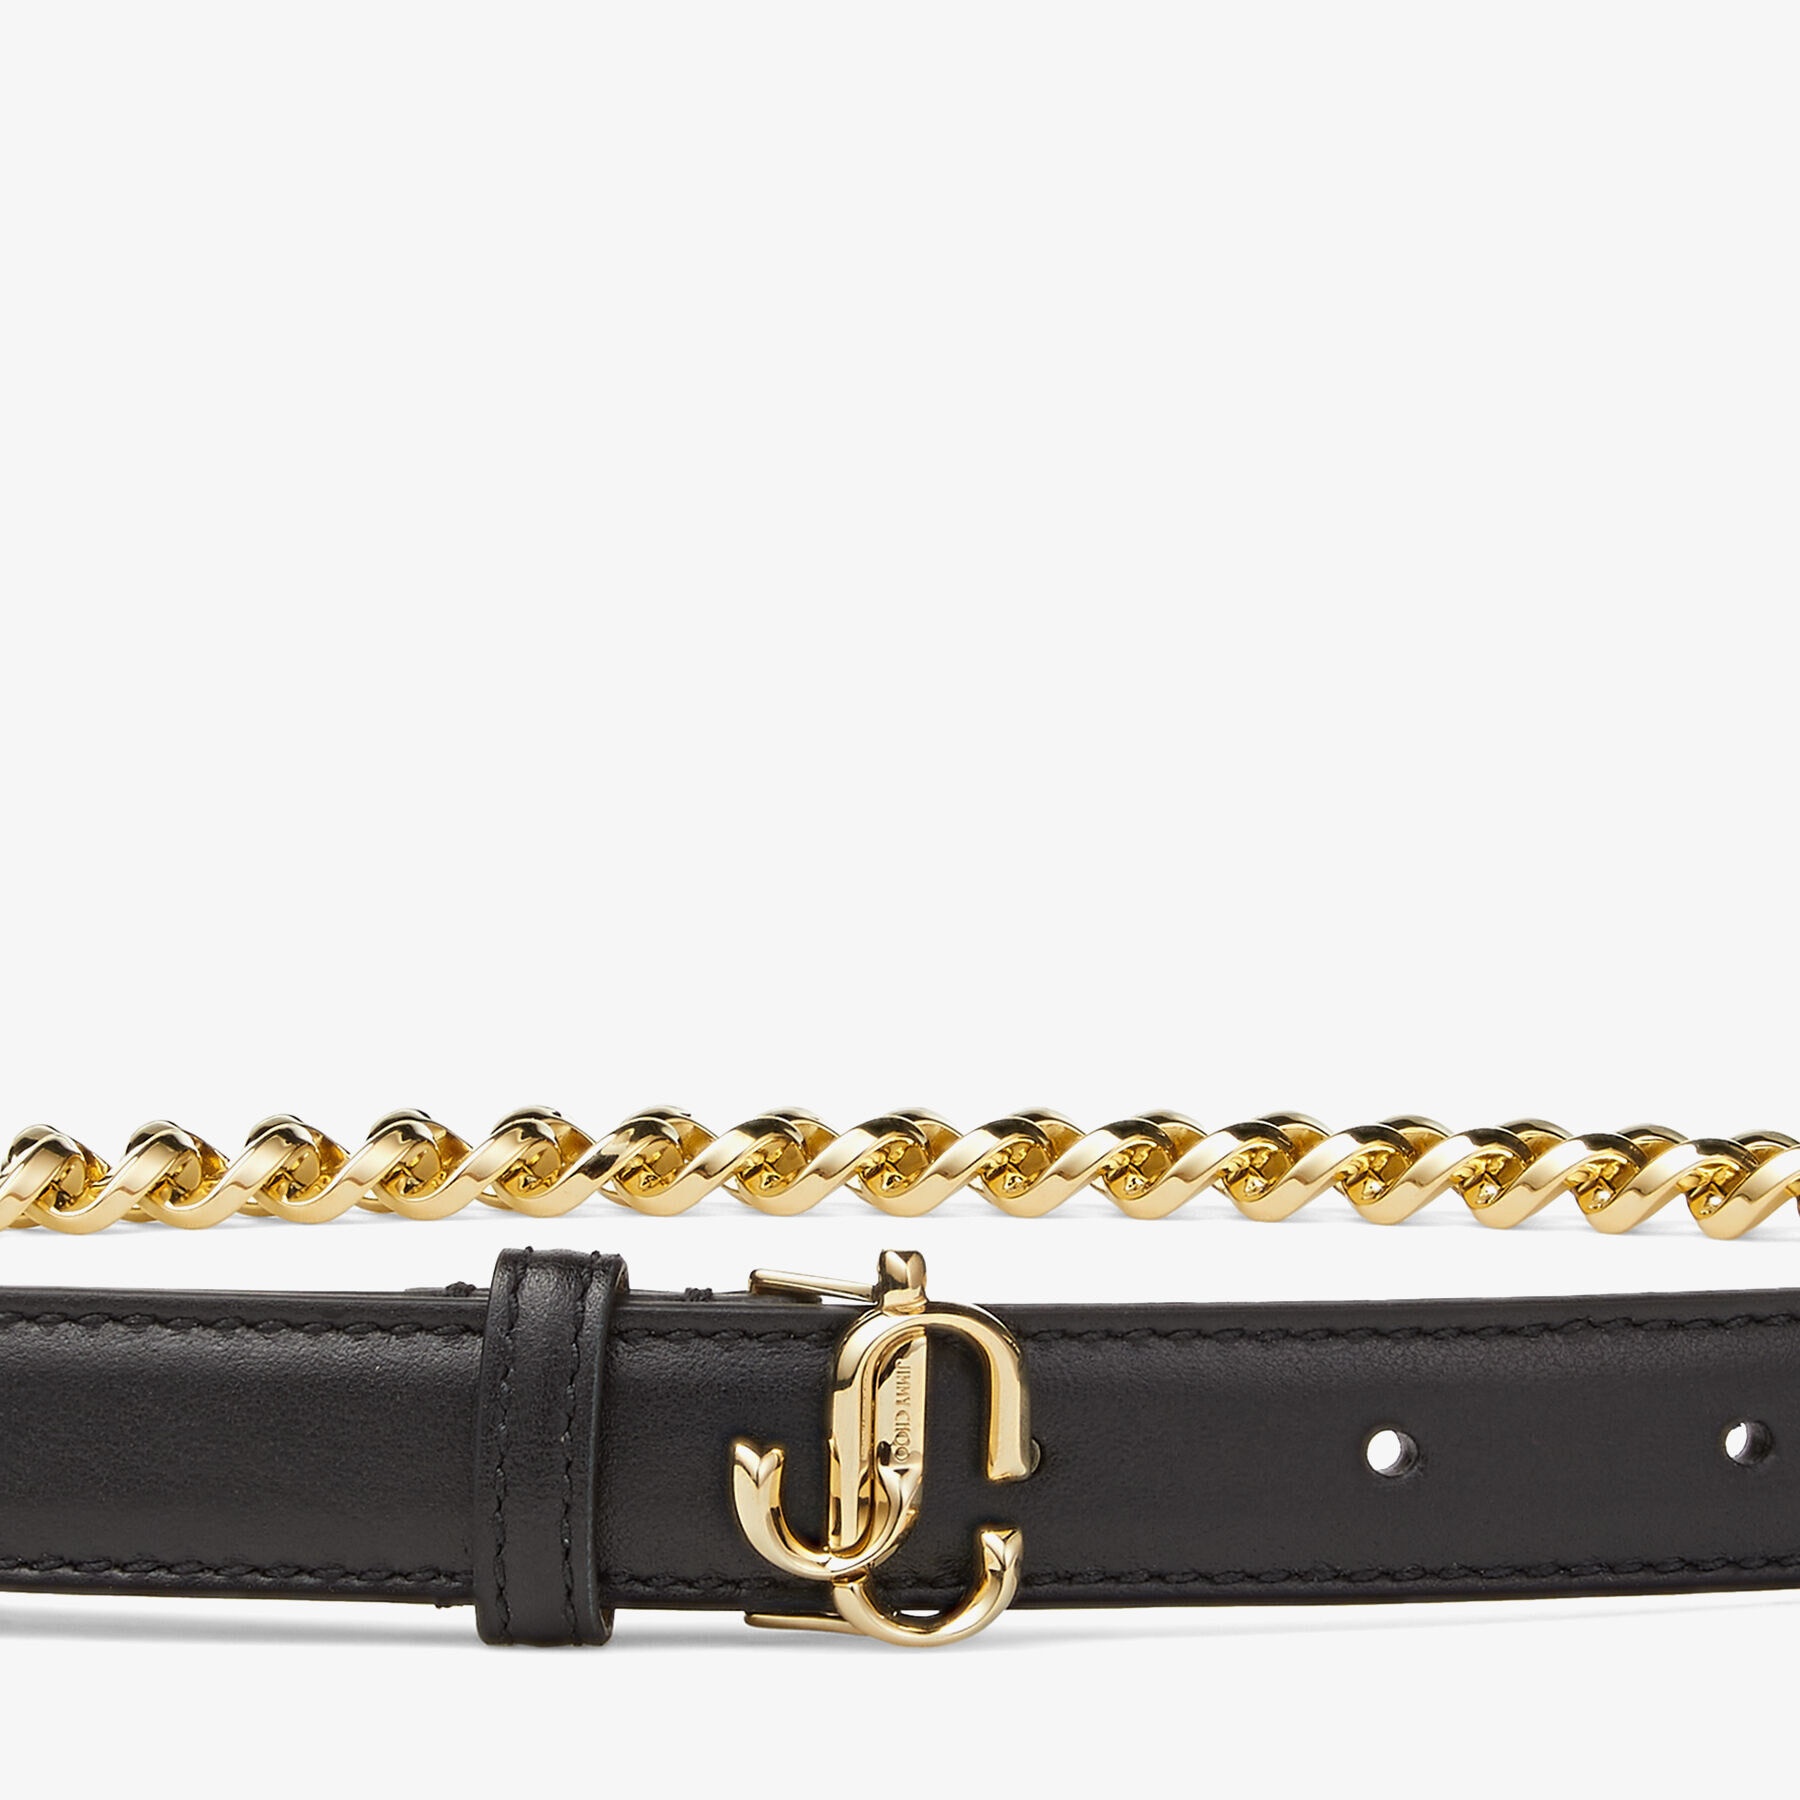 JC Chain
Black Soft Shiny Calf Leather and Chain Belt with Light Gold JC Emblem - 2